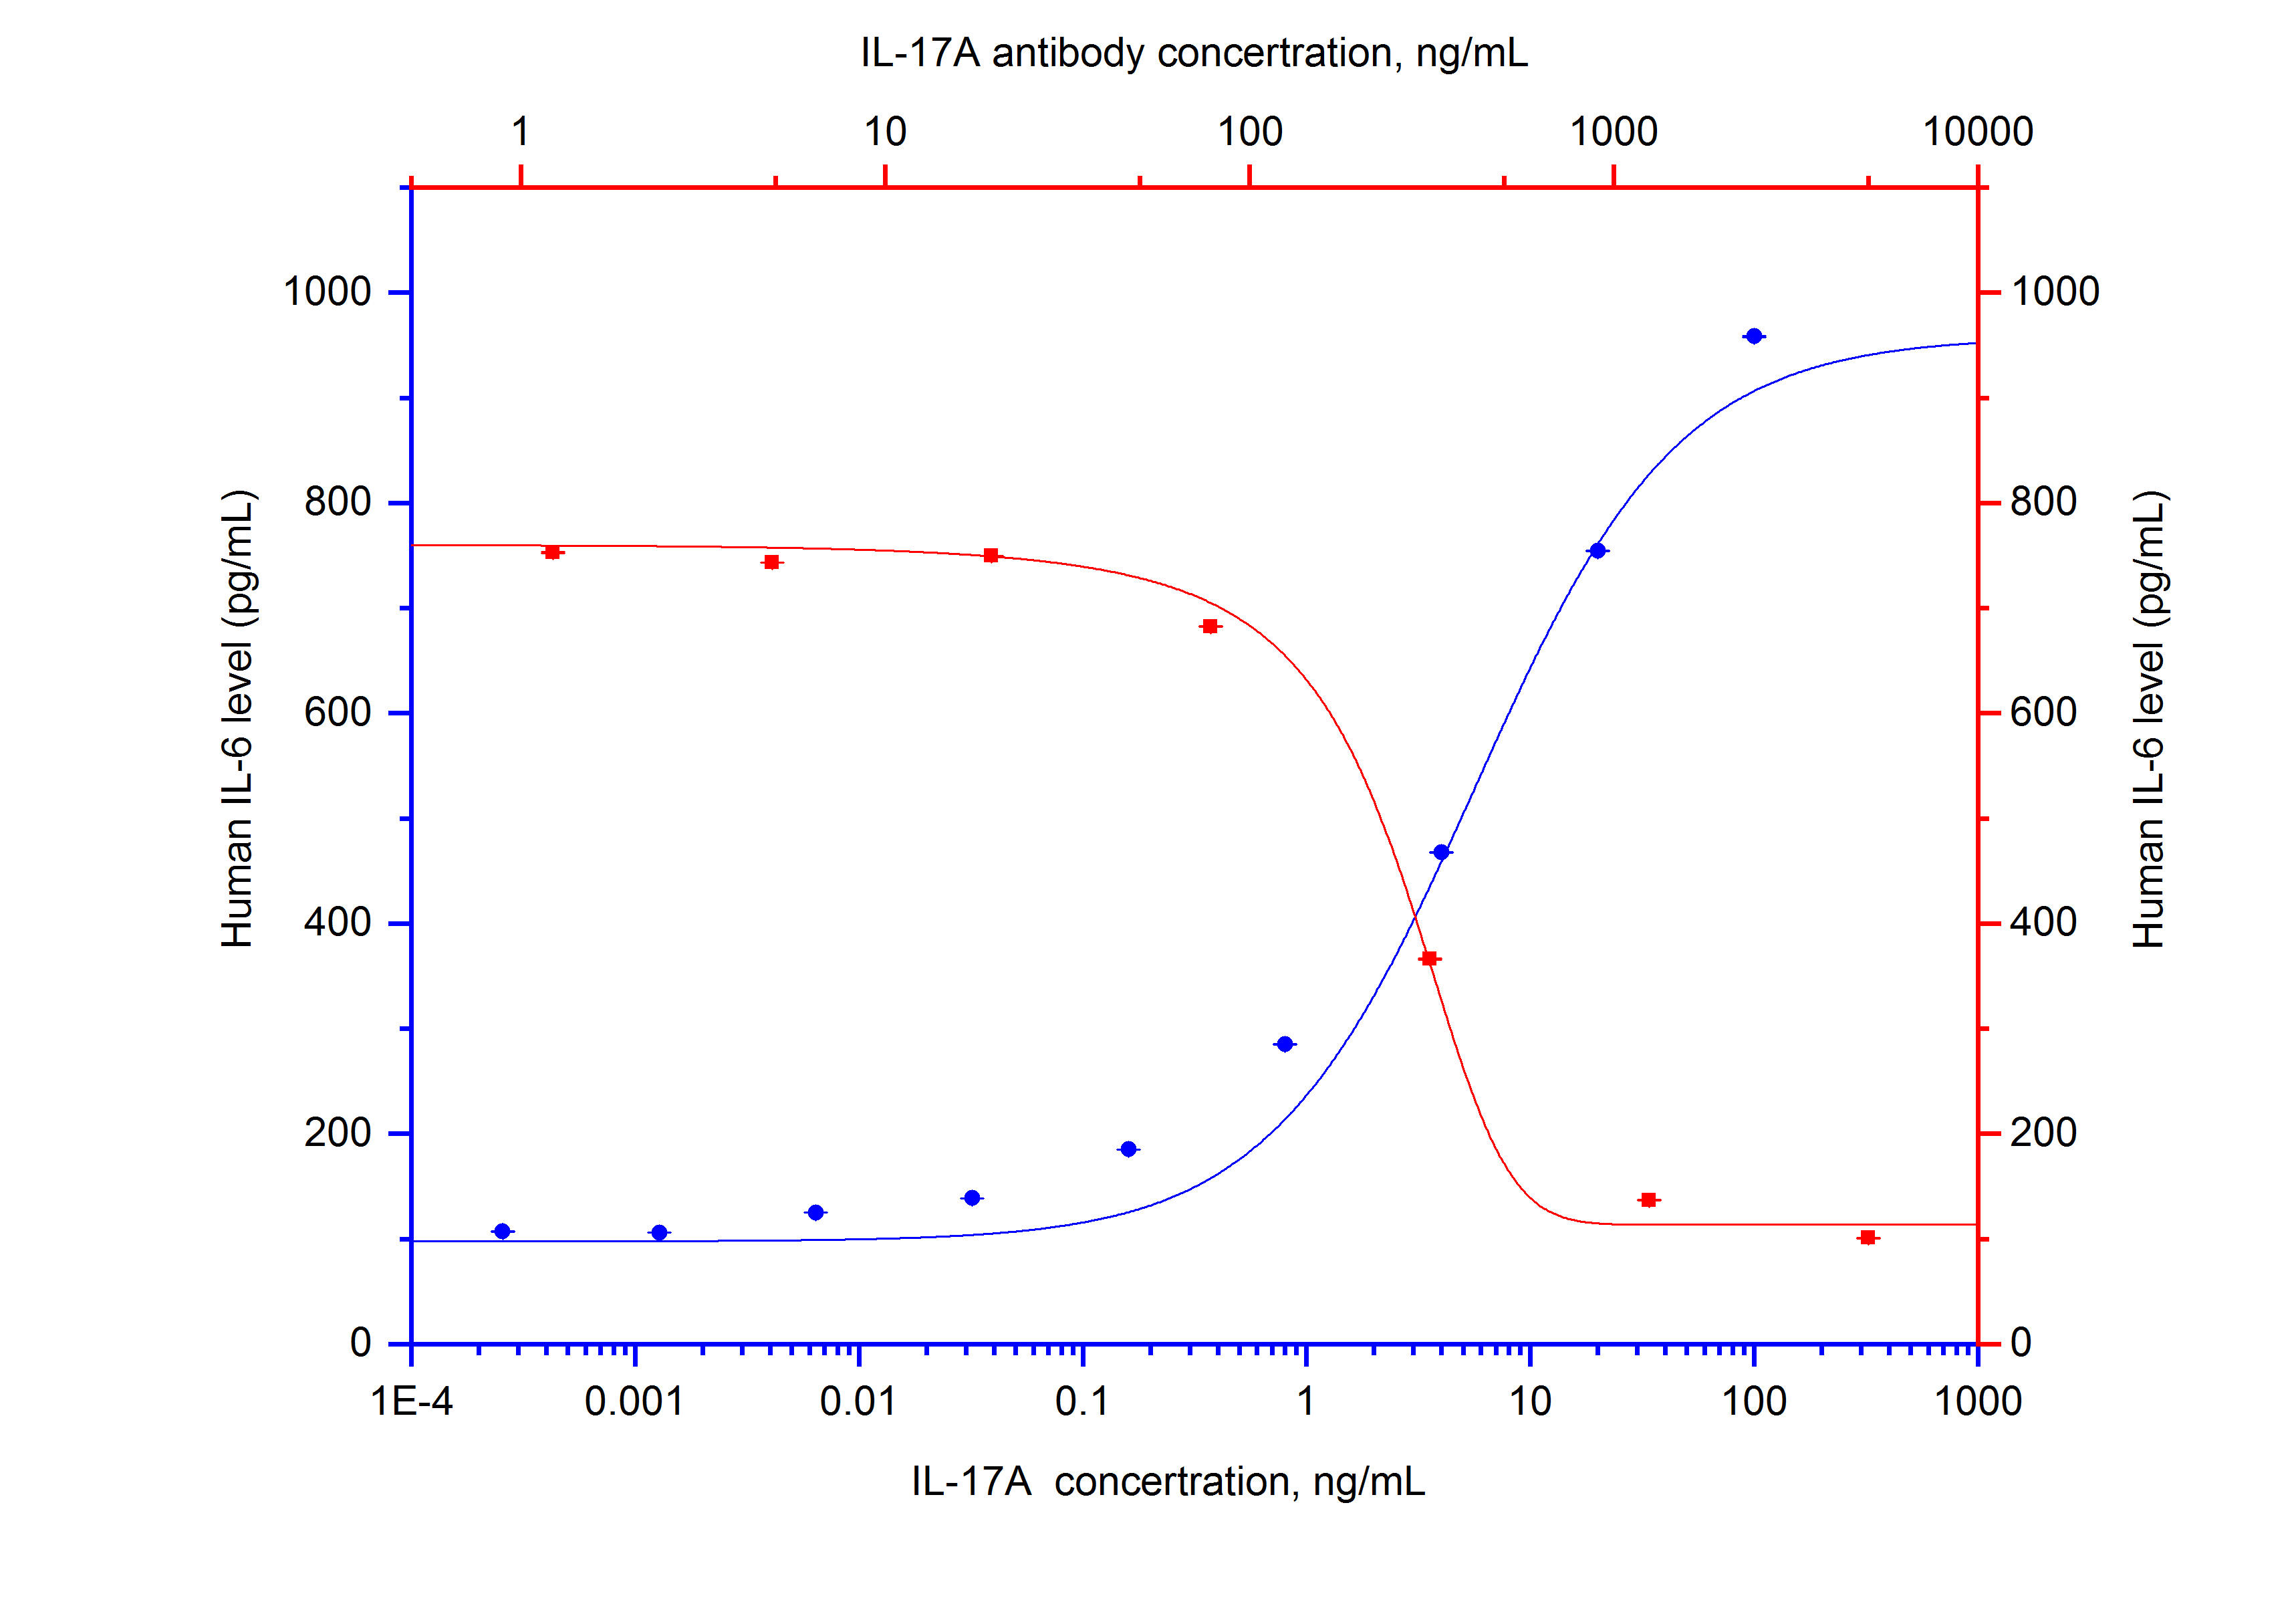 Recombinant human IL-17A (Cat.NO. HZ-1113) stimulates HT-1080 cells (human fibroblast cell line) produce IL-6 in a dose dependent manner (blue curve, refer to bottom X-Left Y axis). The activity of human IL-17A (40ng/mL HZ-1113) is neutralized by mouse anti-human IL-17A monoclonal antibody 69021-1-Ig (red curve, refer to top X-right Y axis). The ND50 is typically 200-600ng/mL.